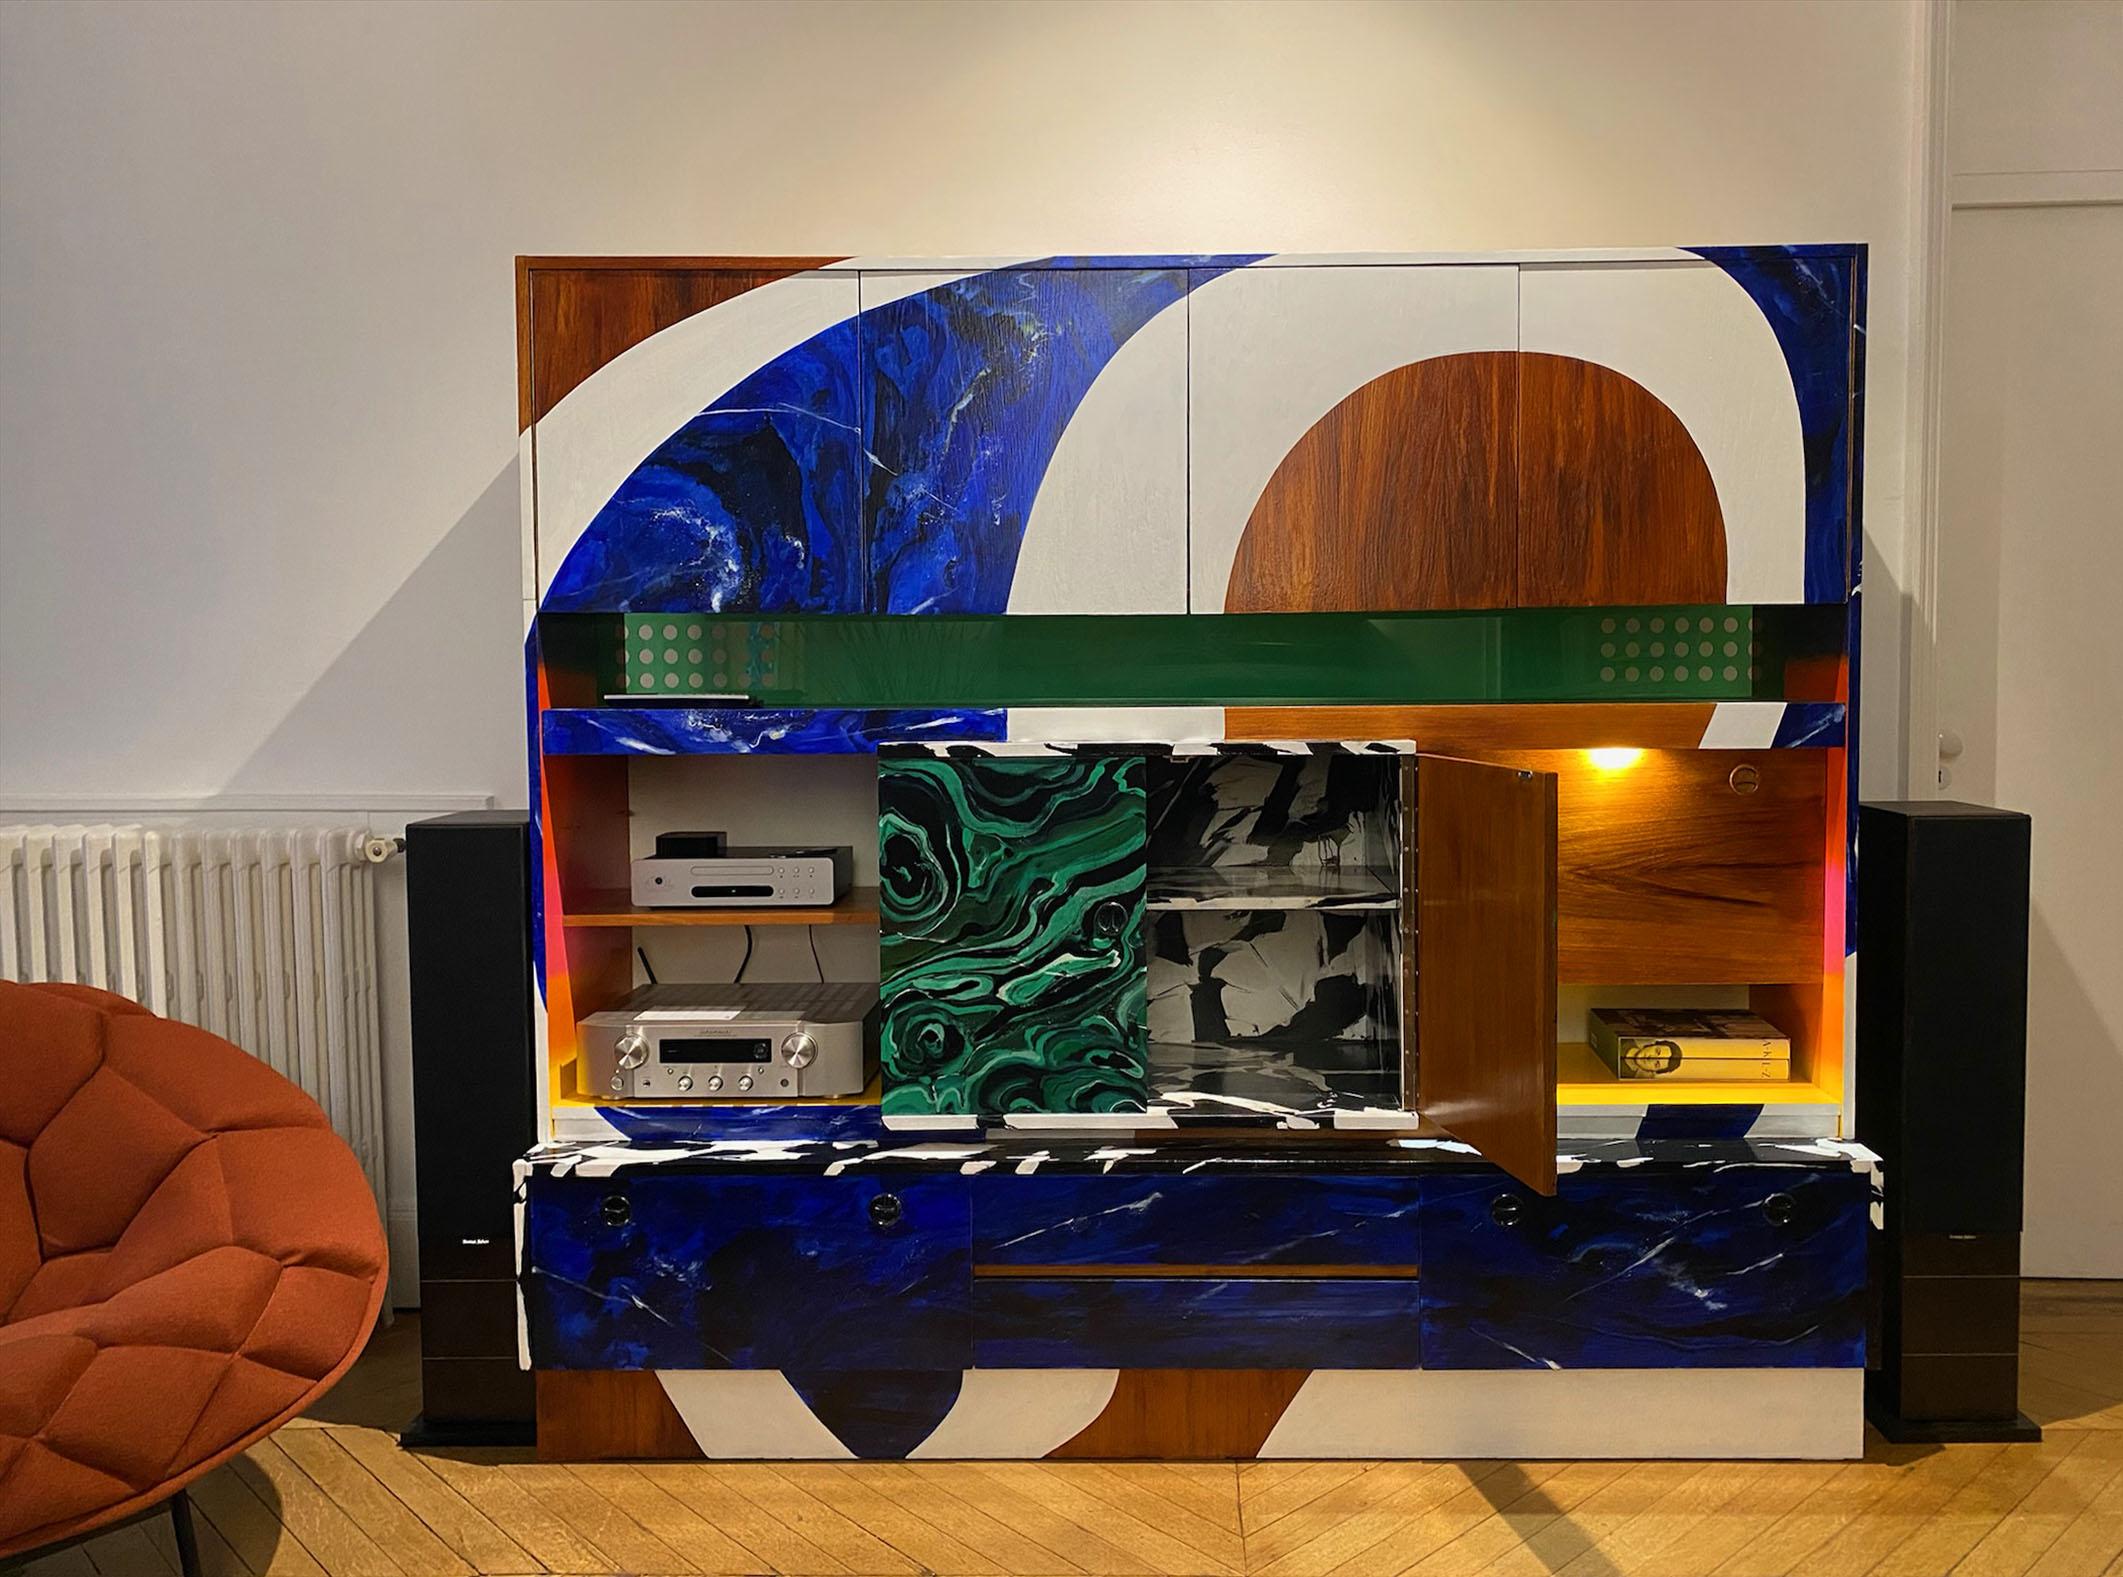 This imposing sideboard from the 60's led us to reflect on its materials and shapes, we wanted to create a unique object.
We let ourselves go to a dream assembling materials that theoretically could not hold together.
We rethought it like a